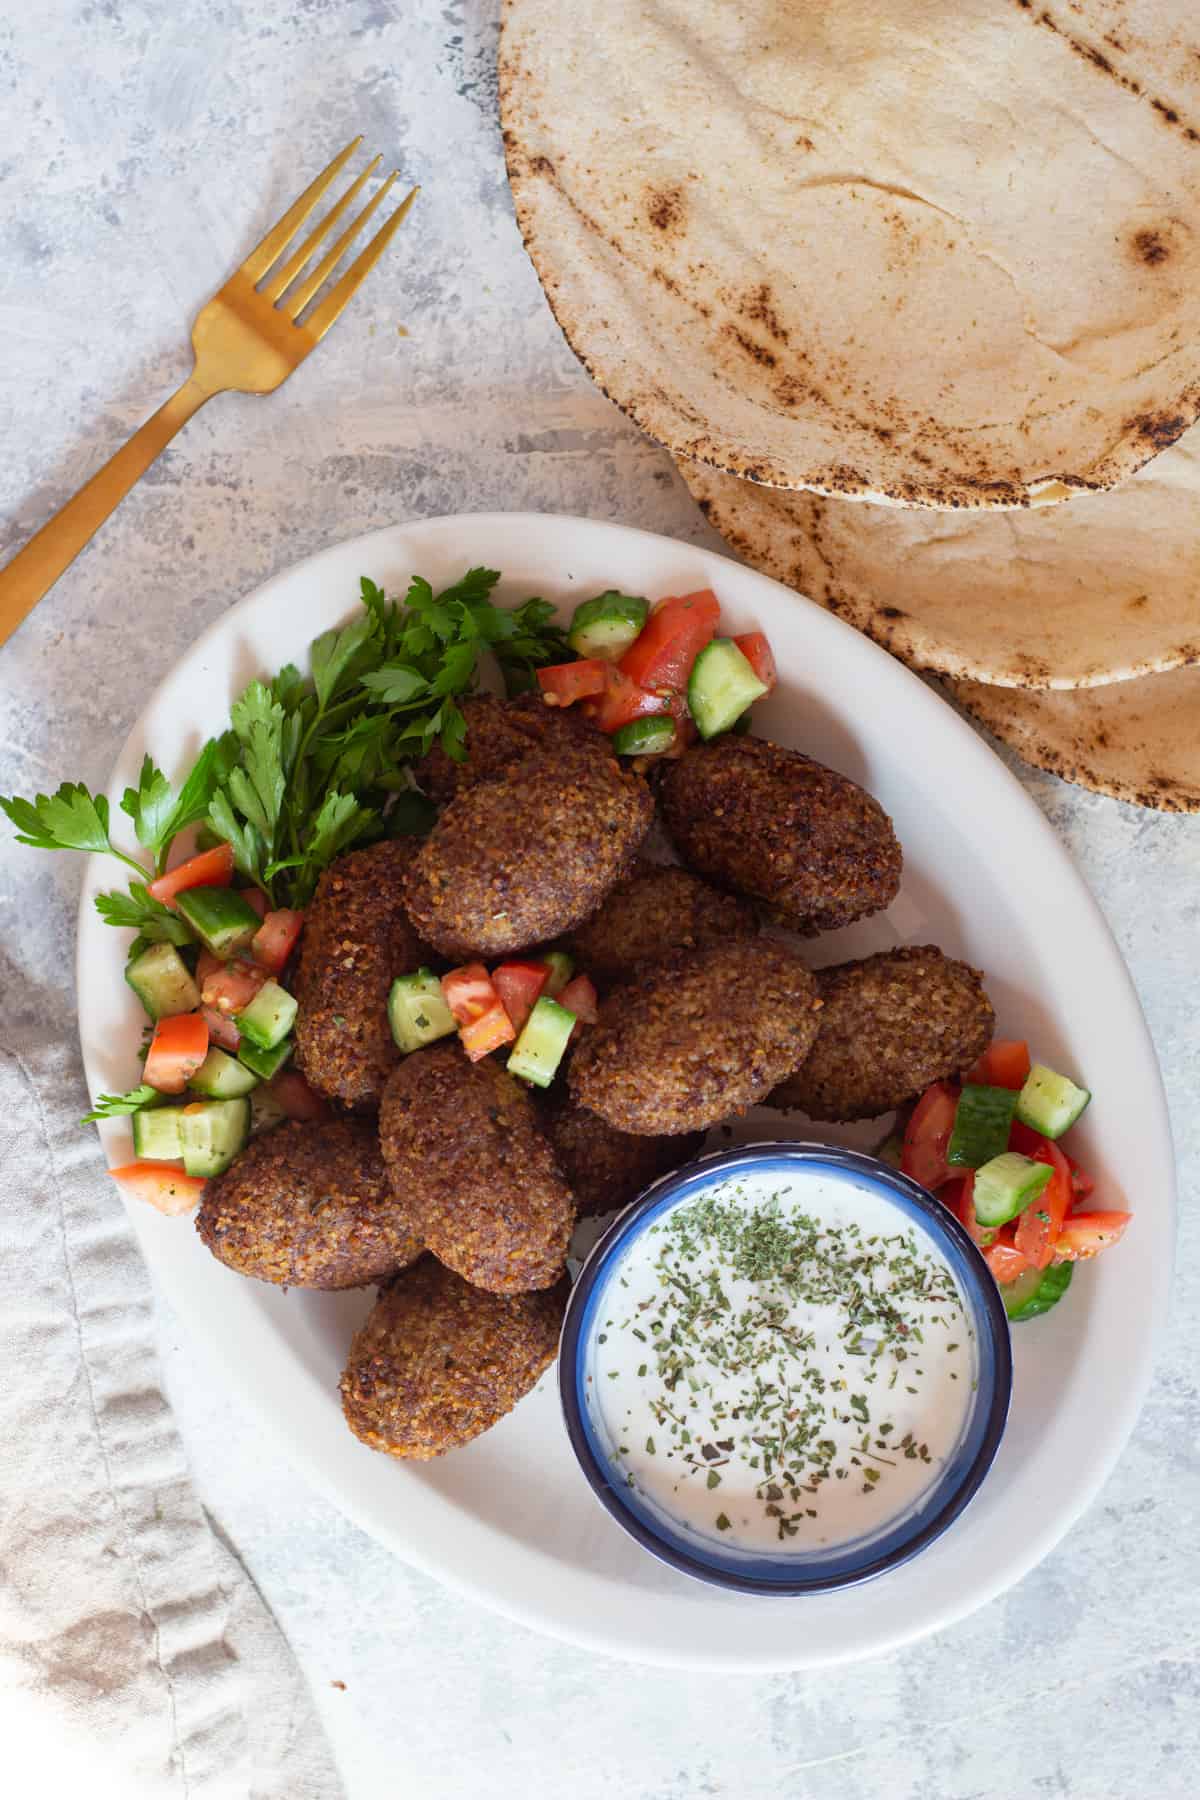 Kibbeh is a Middle Eastern meatball dish containing bulgur, ground beef and warm spices. A great kibbeh is characterized by a tender shell stuffed with delicious spiced filling. Learn how to perfect this classic of Middle Eastern cuisine with our step-by-step tutorial and video.